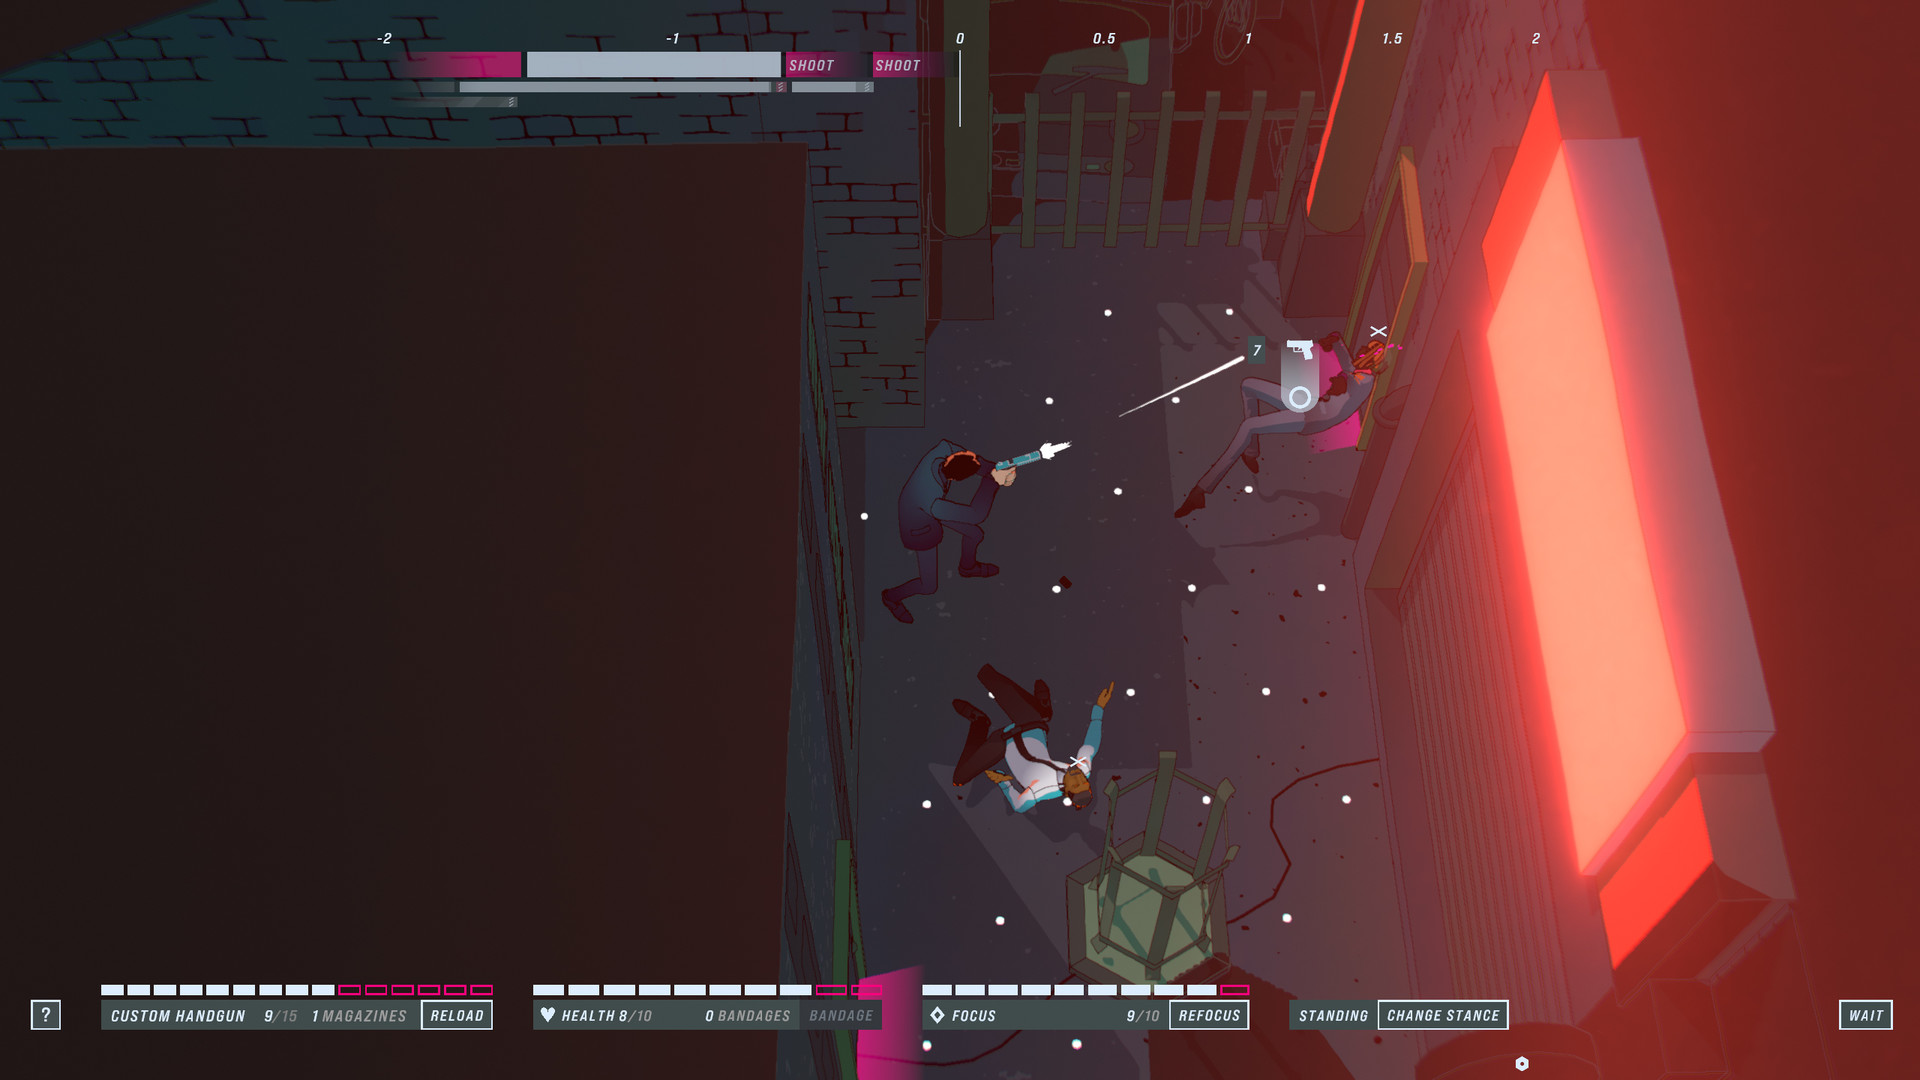 Download John Wick Hex For PC for free, the game size is – 300MB